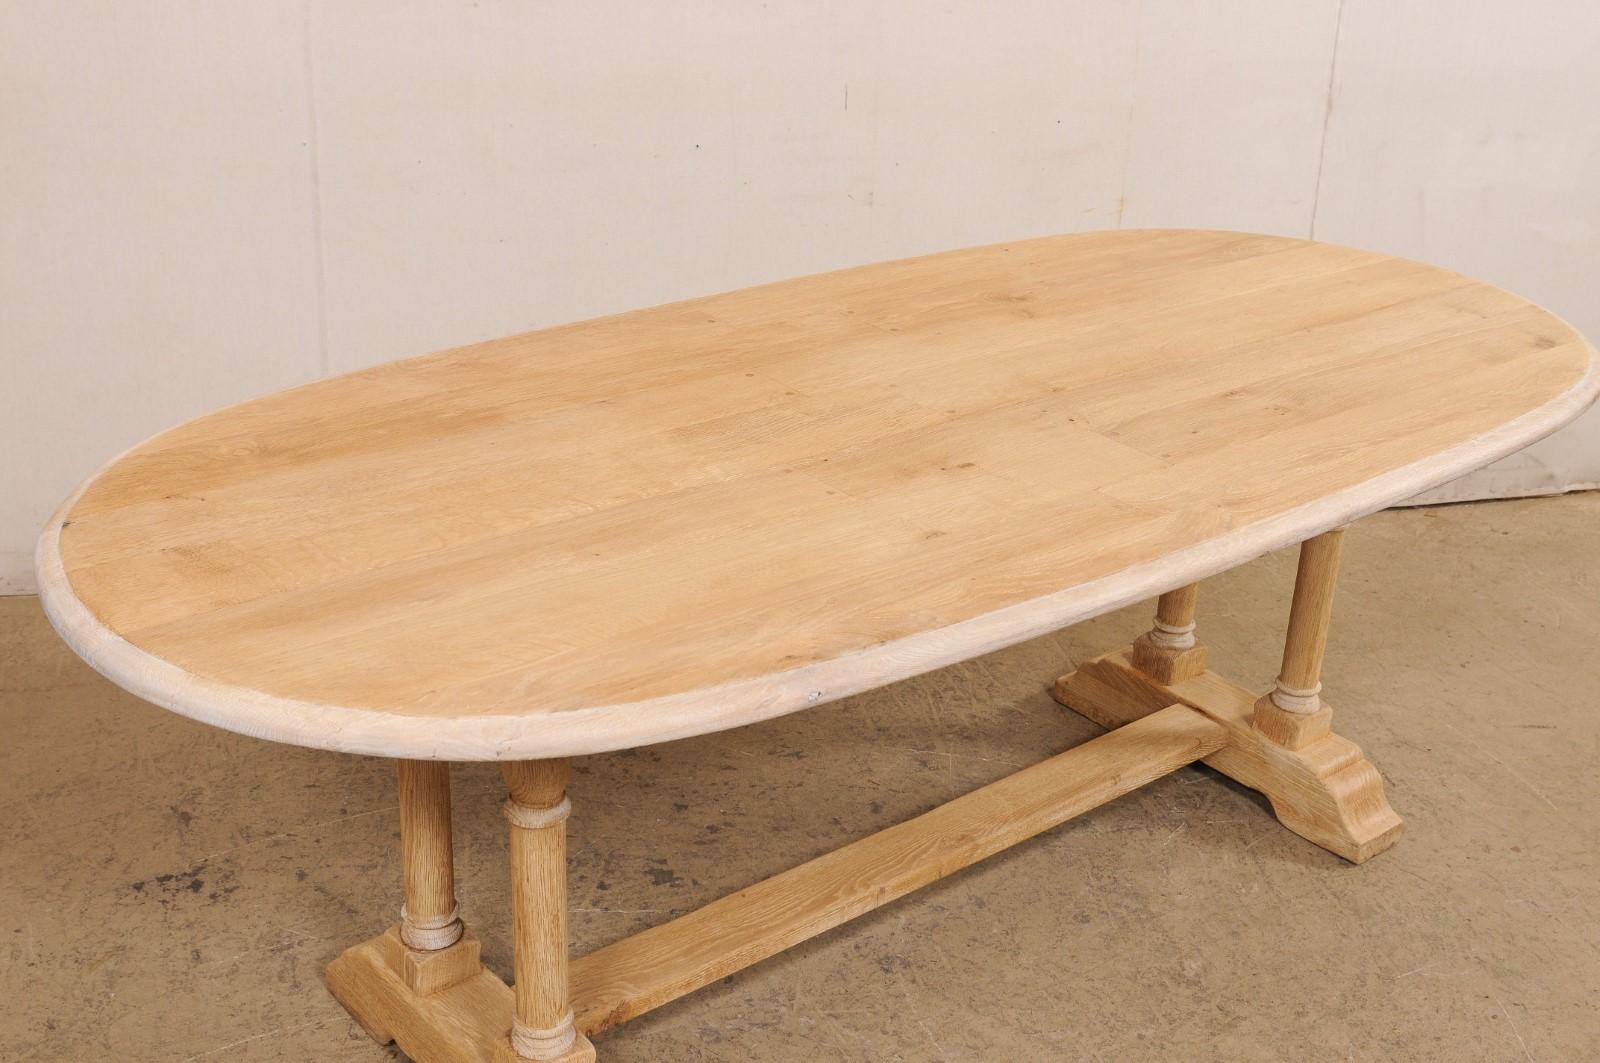 Oak A French Oval-Shaped Bleached Wood Trestle Dining Table, Mid 20th Century For Sale